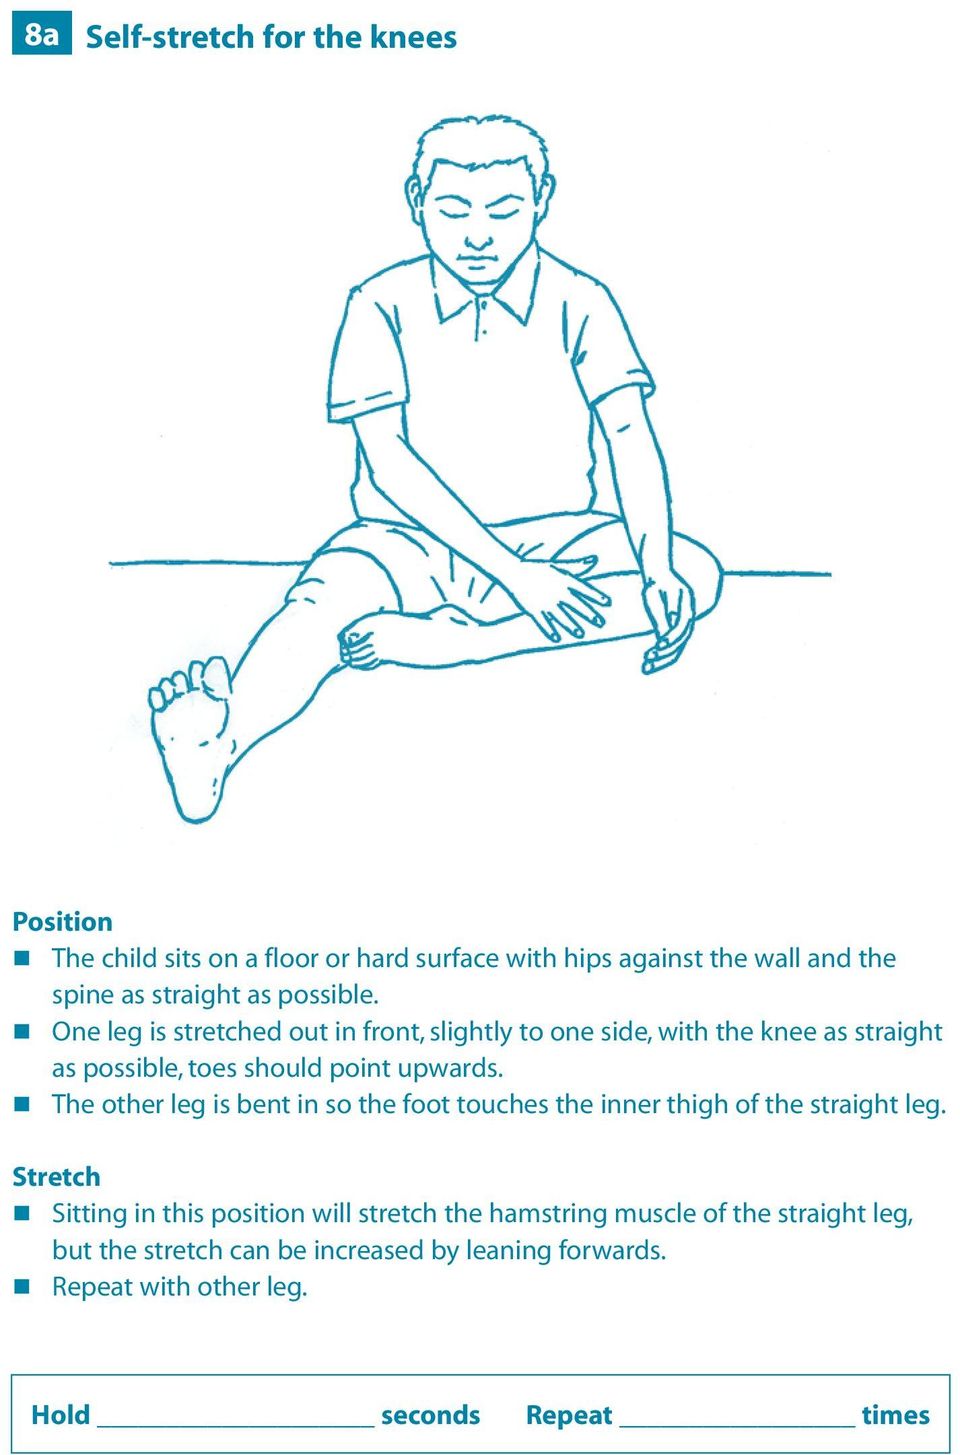 One leg is stretched out in front, slightly to one side, with the knee as straight as possible, toes should point upwards.